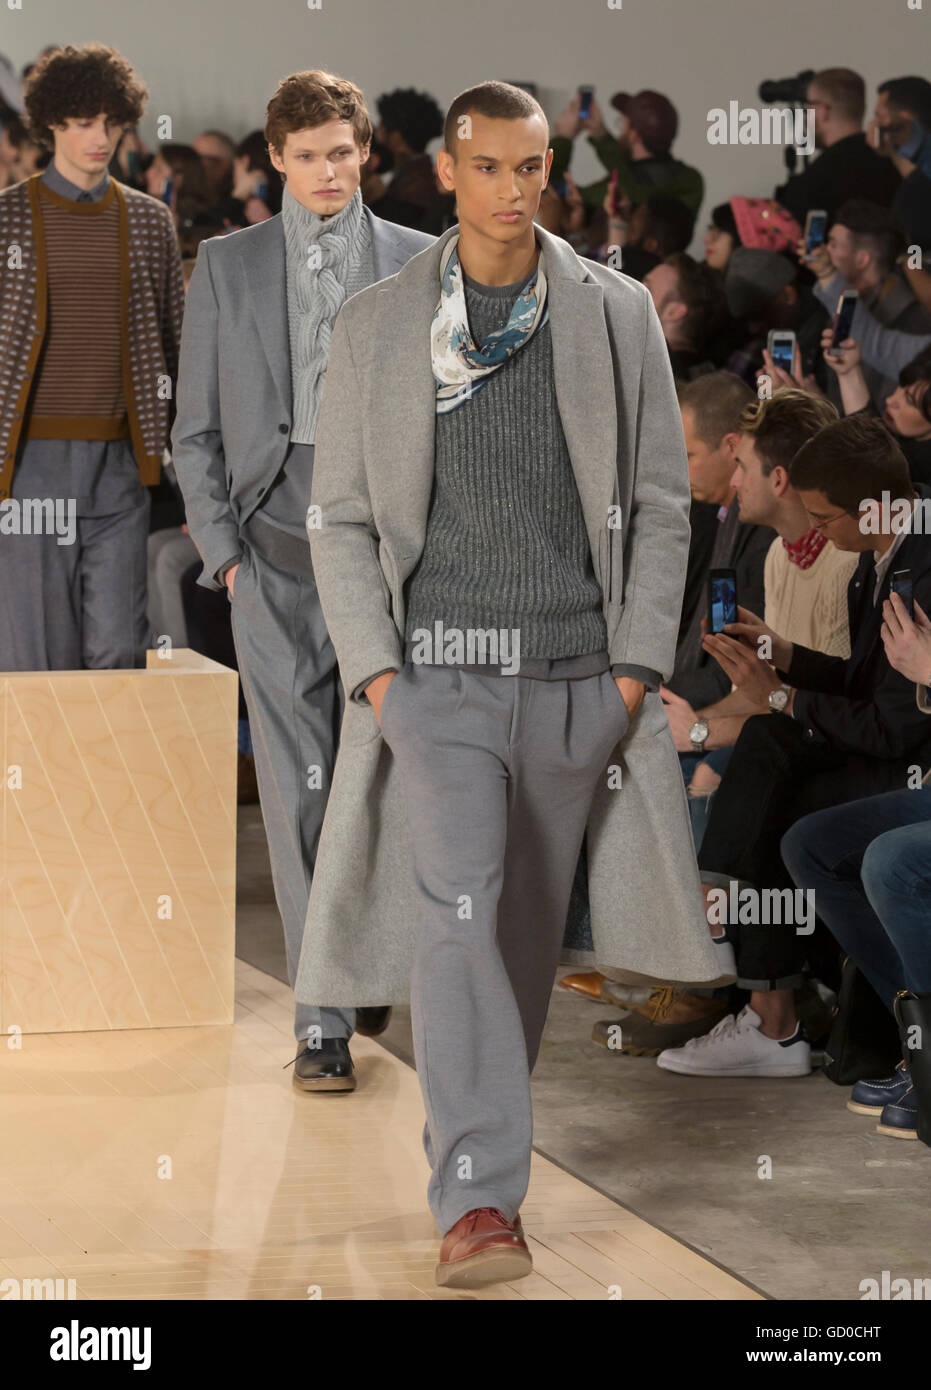 NEW YORK, NY - 2016: Models walk the at the Perry Ellis Men's Fall 2016 fashion show Stock Photo - Alamy